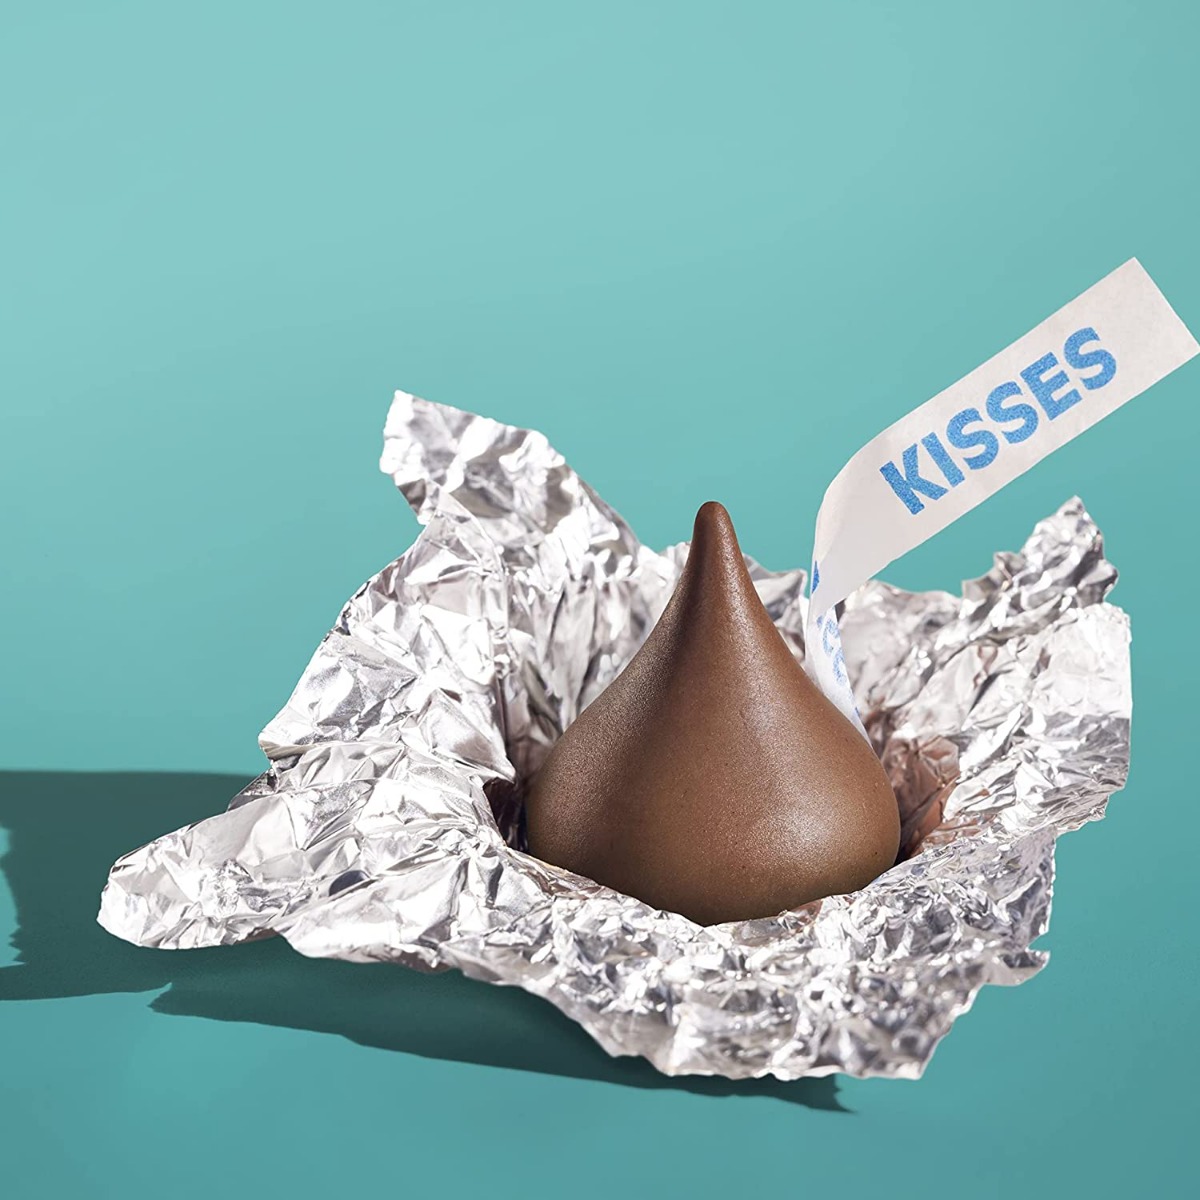 5 Pack – HERSHEY’S KISSES Milk Chocolate Candy, Halloween Candy, 306g Share Bag-11269